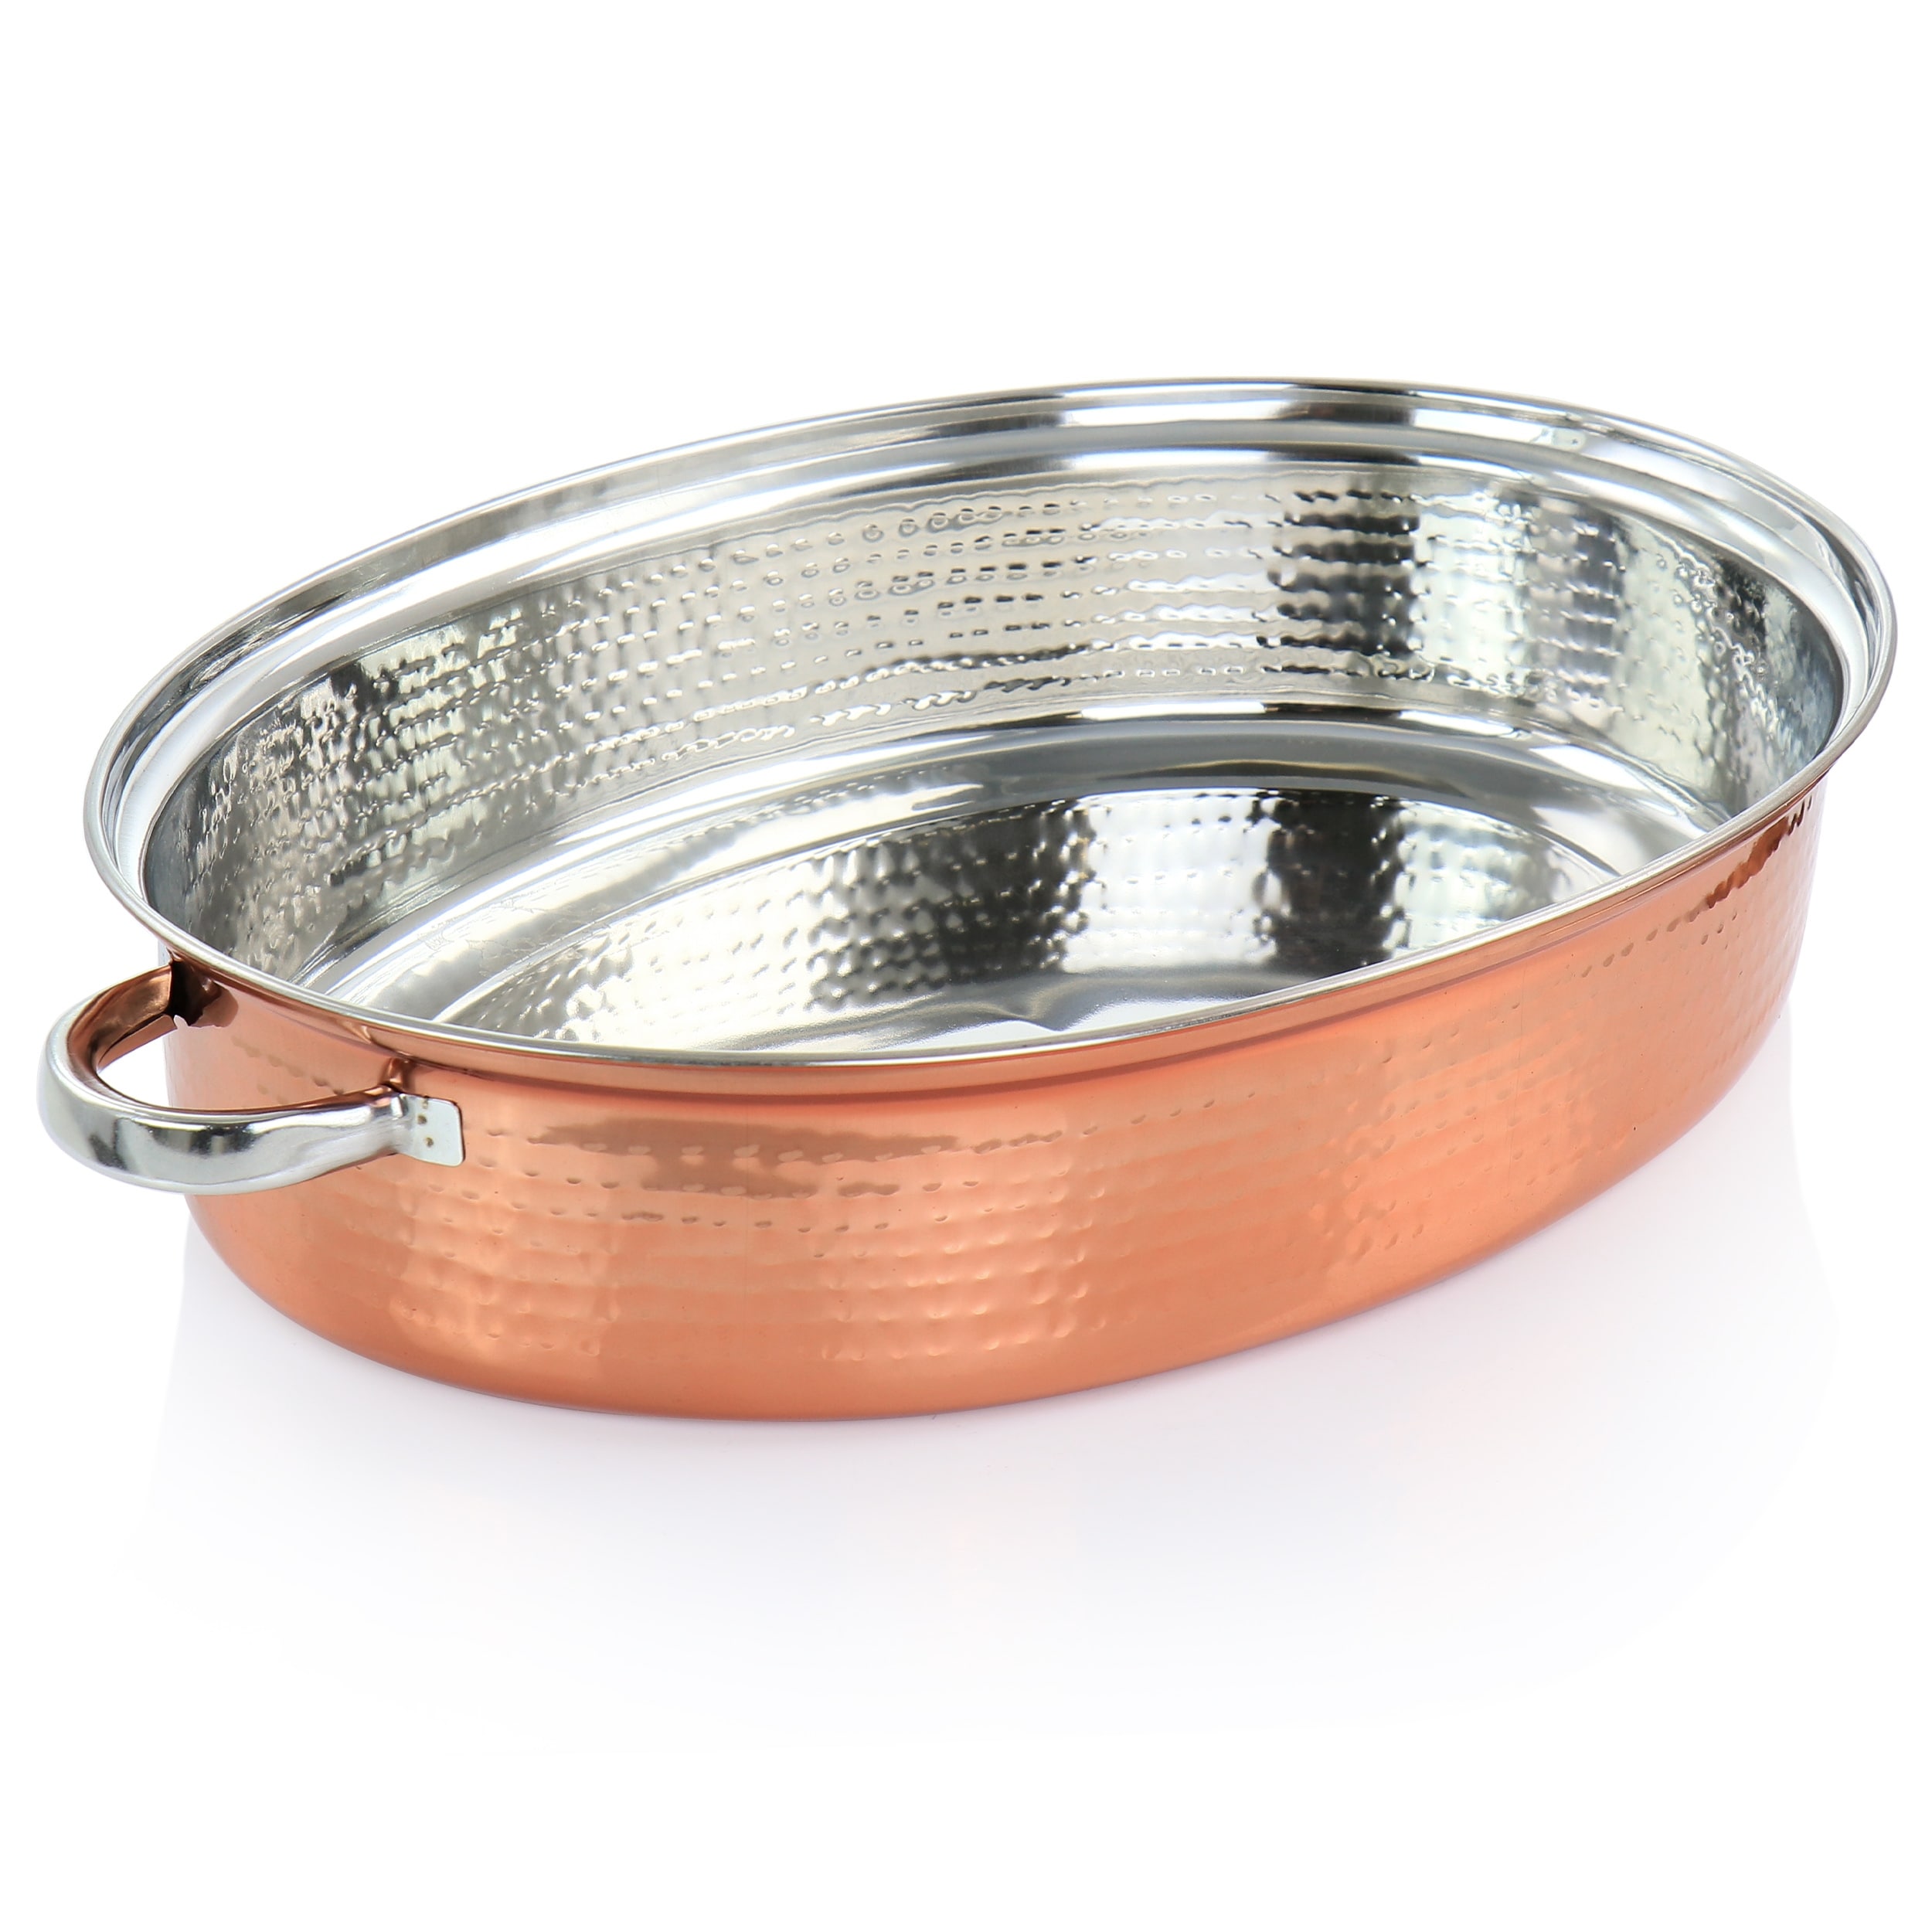 https://ak1.ostkcdn.com/images/products/is/images/direct/2fd4a6aad14a4b297fc1dbb8640c93ef1af9120e/Gibson-Home-Radiance-17.5-Inch-Stainless-Steel-Copper-Plated-Oval-Roaster-with-Lid-and-Roasting-Rack.jpg